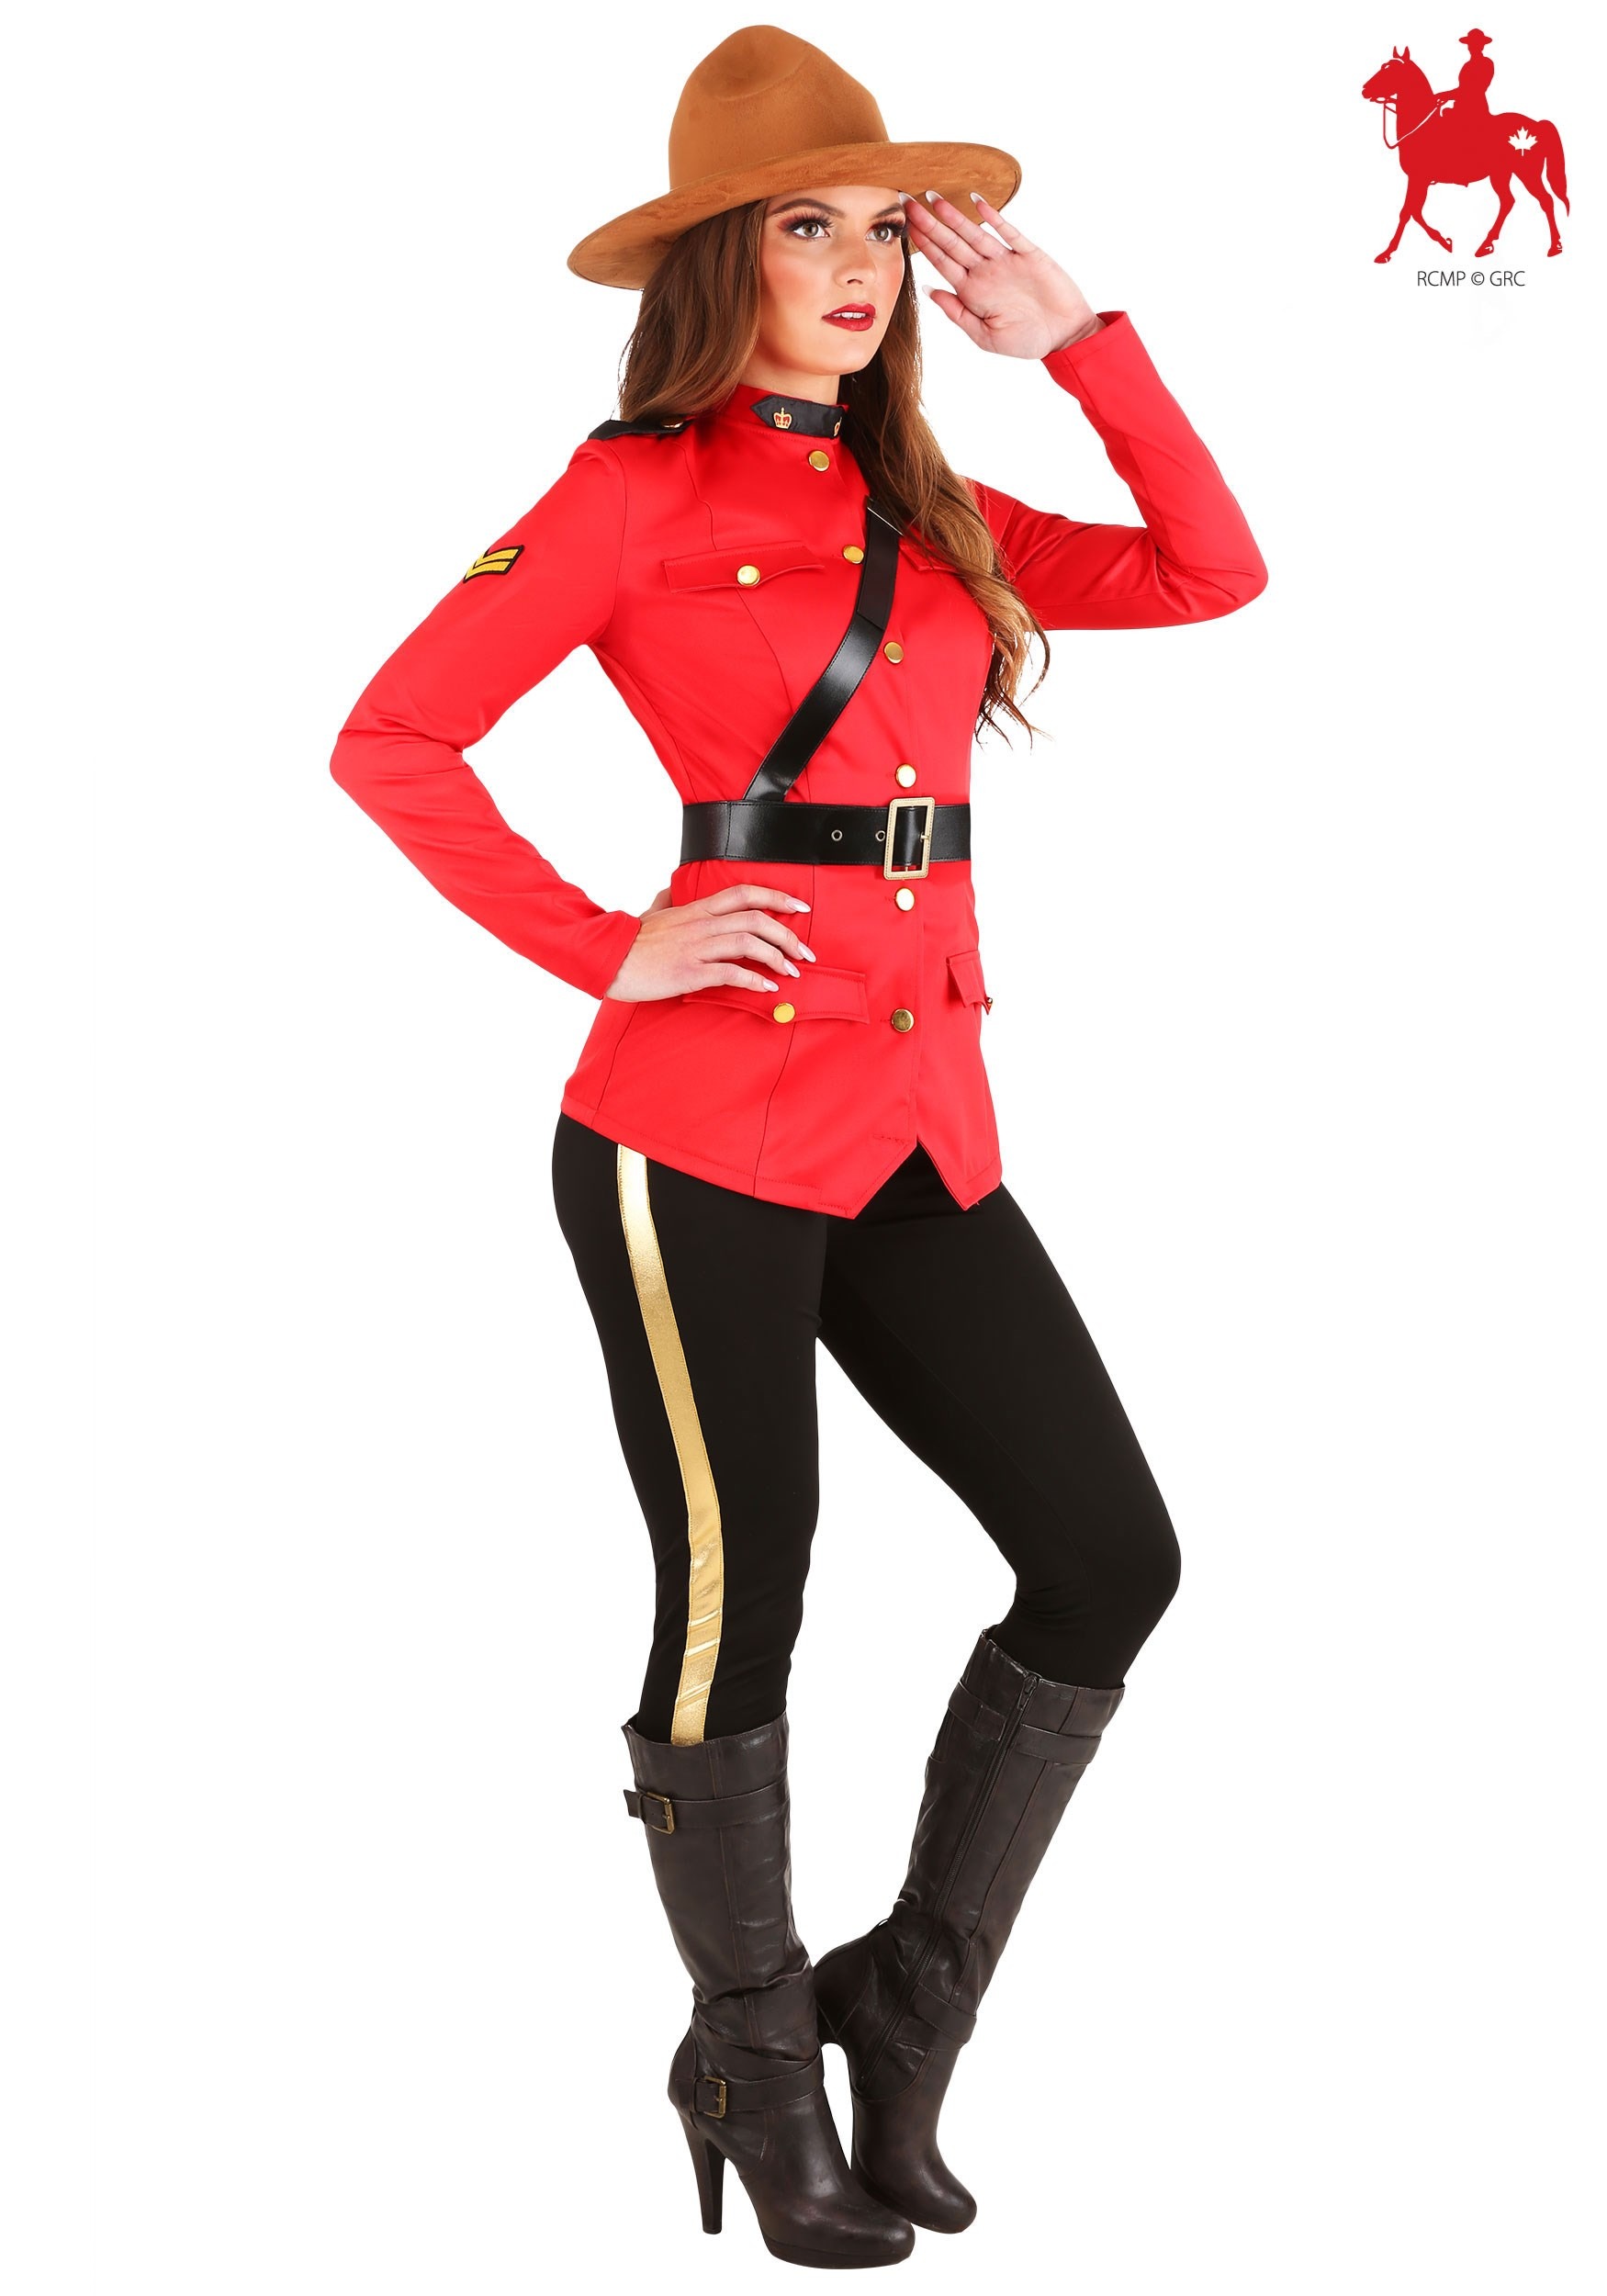 RCMP Canadian Mountie Costume for Women